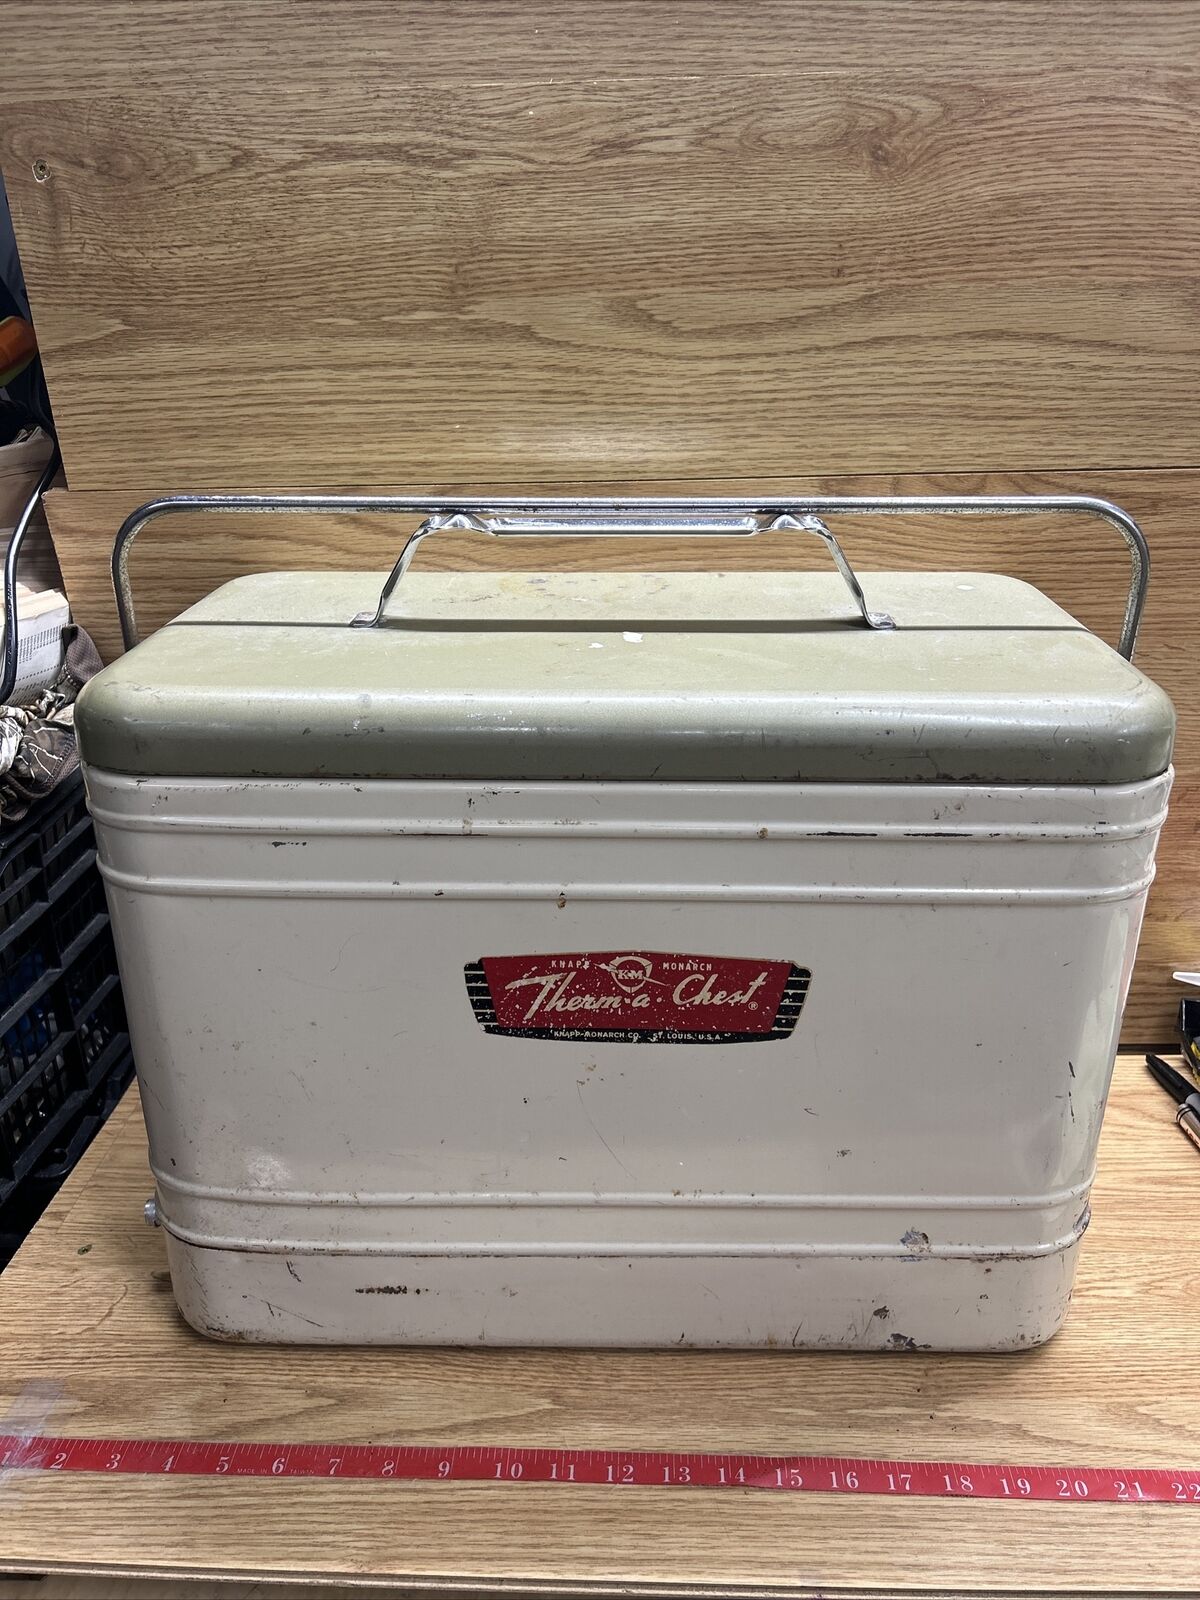 Therm-a-Chest Ice Cooler Chest MCM 1950s All Original Knapp-Monarch